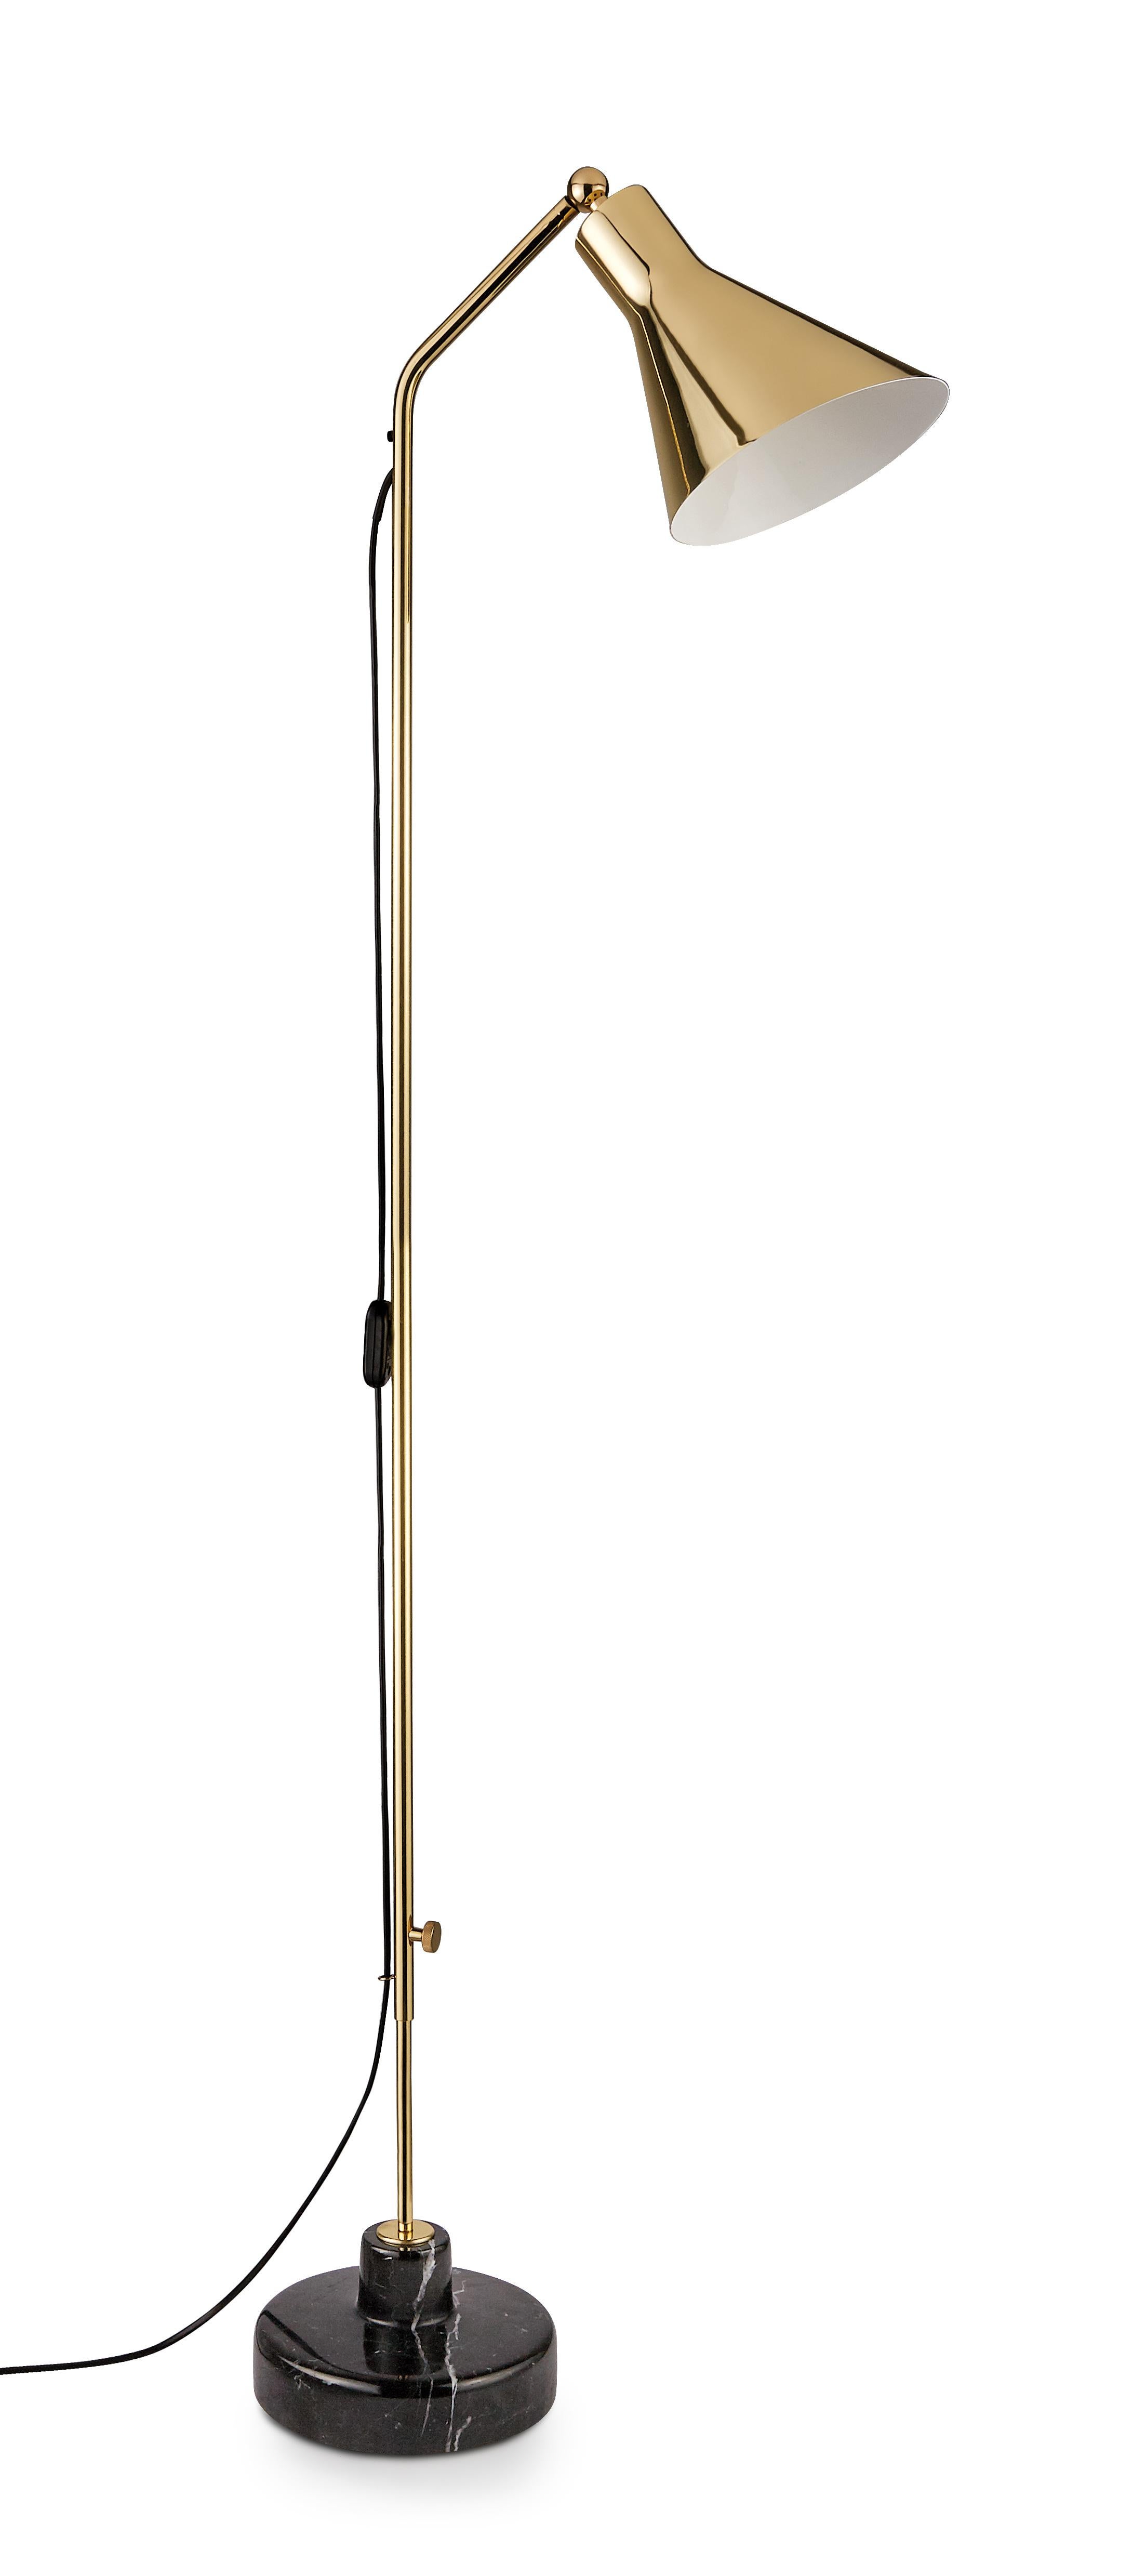 Ignazio Gardella Alzabile Floor Lamp in Brass and Black Marble for Tato Italia.

Executed in black Marquinia marble, manganese shade and polished brass. Height and shade are adjustable as seen in the photos. 

Price is per item. Available to order